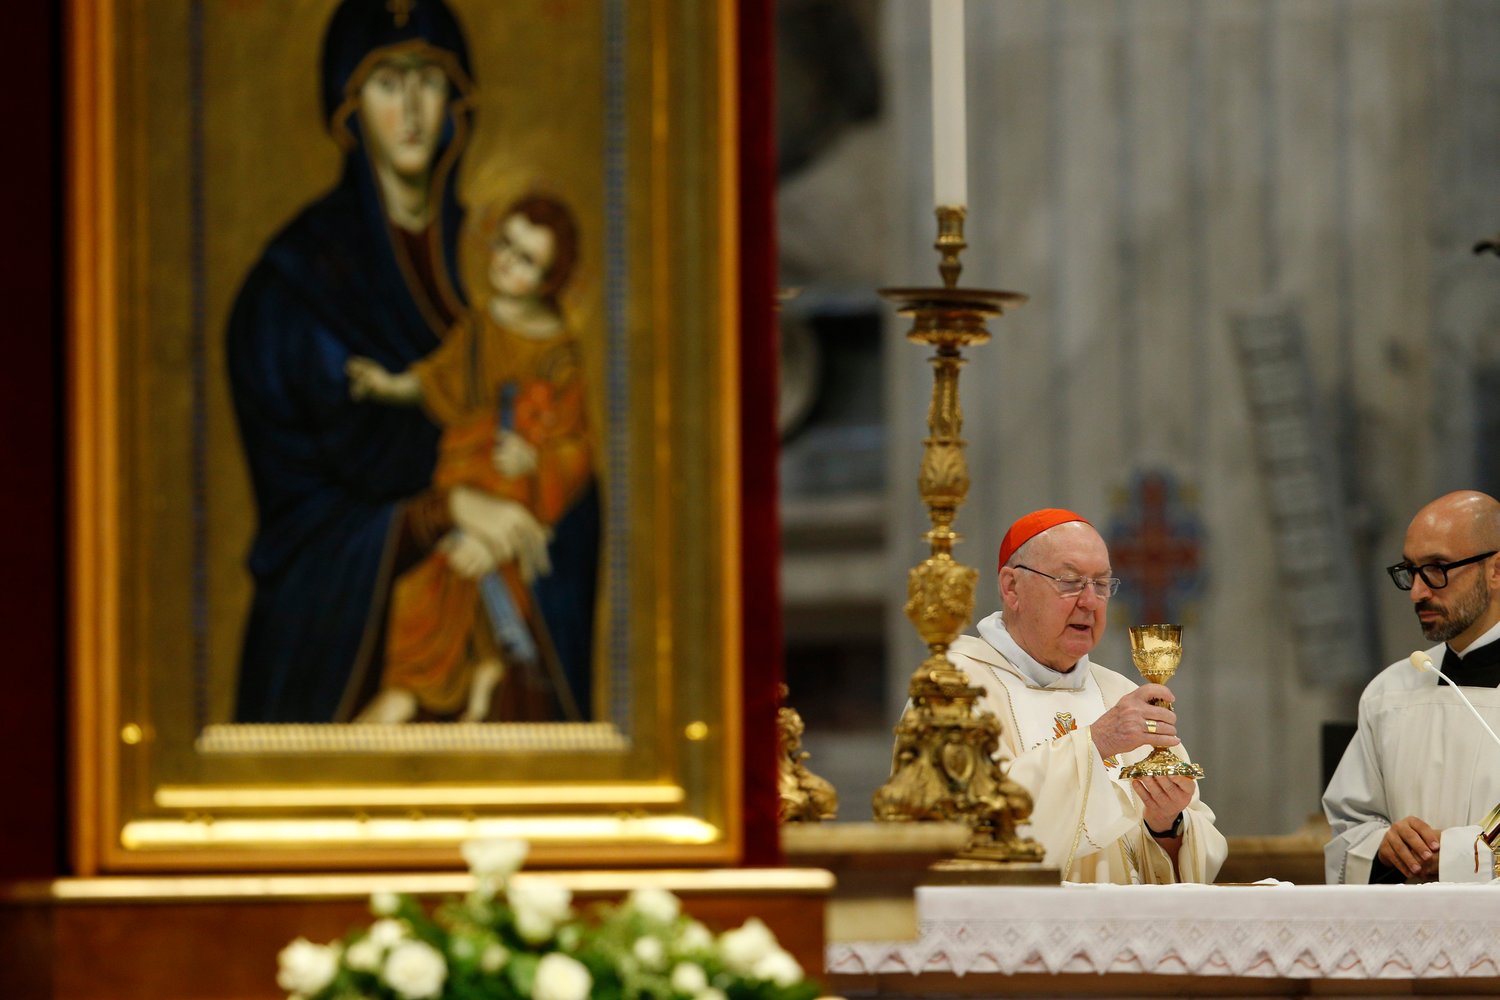 Cardinal Kevin J. Farrell, prefect of the Dicastery for Laity, the Family and Life, celebrates the Eucharist during Mass in St. Peter’s Basilica during the World Meeting of Families at the Vatican June 23.